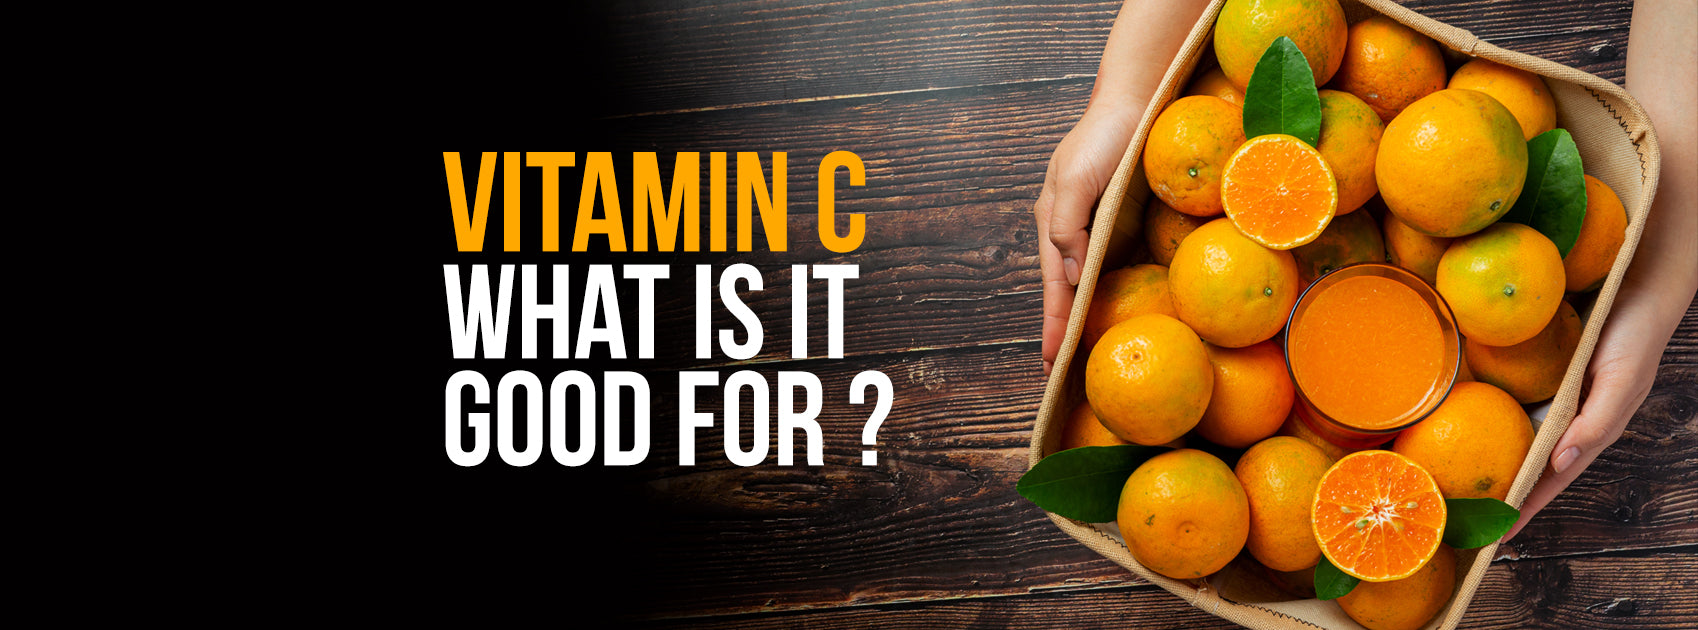 VITAMIN C - What is it Good For & Why is Deficiency Dangerous?